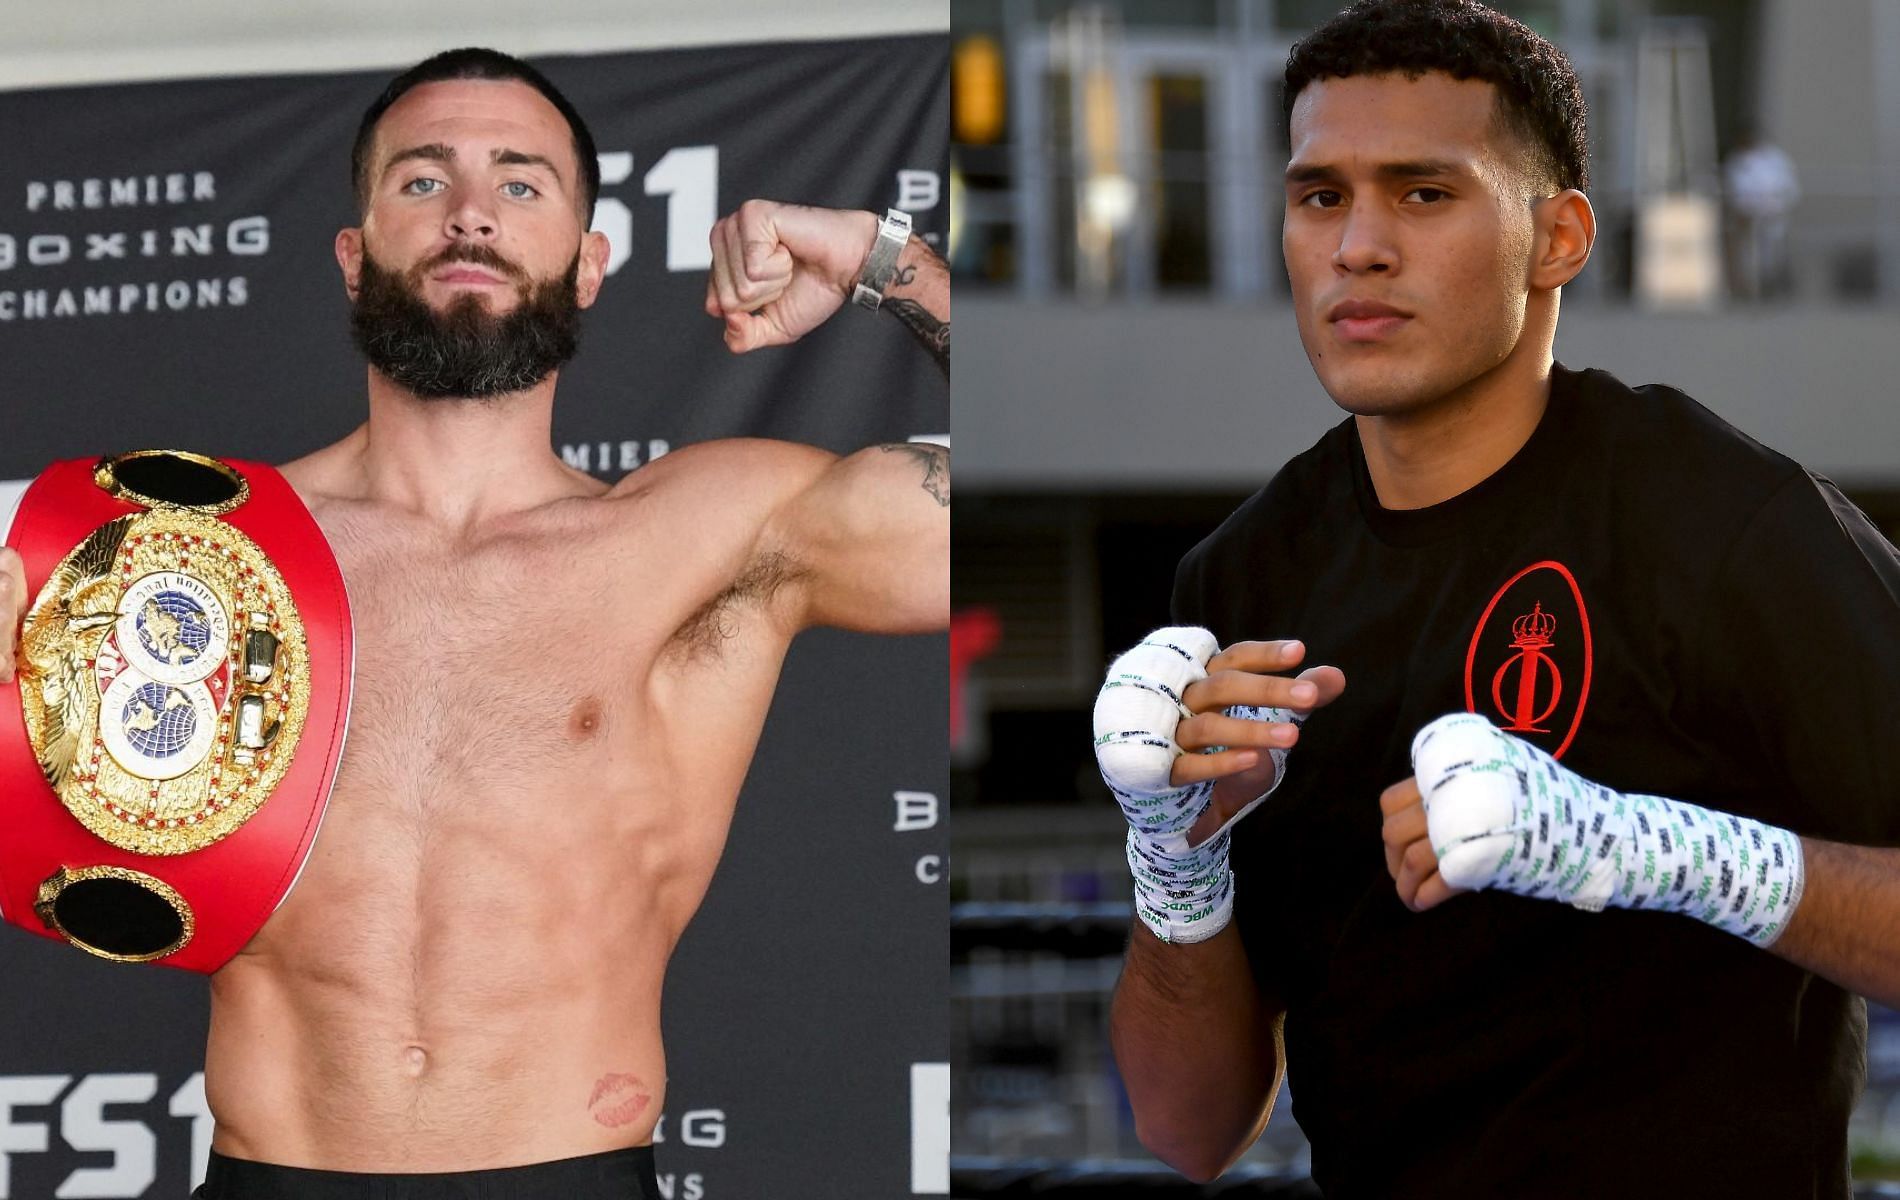 Benavidez vs Plant PPV Price: How Much Will It Cost to Watch David Benavidez vs Caleb Plant on Showtime PPV?